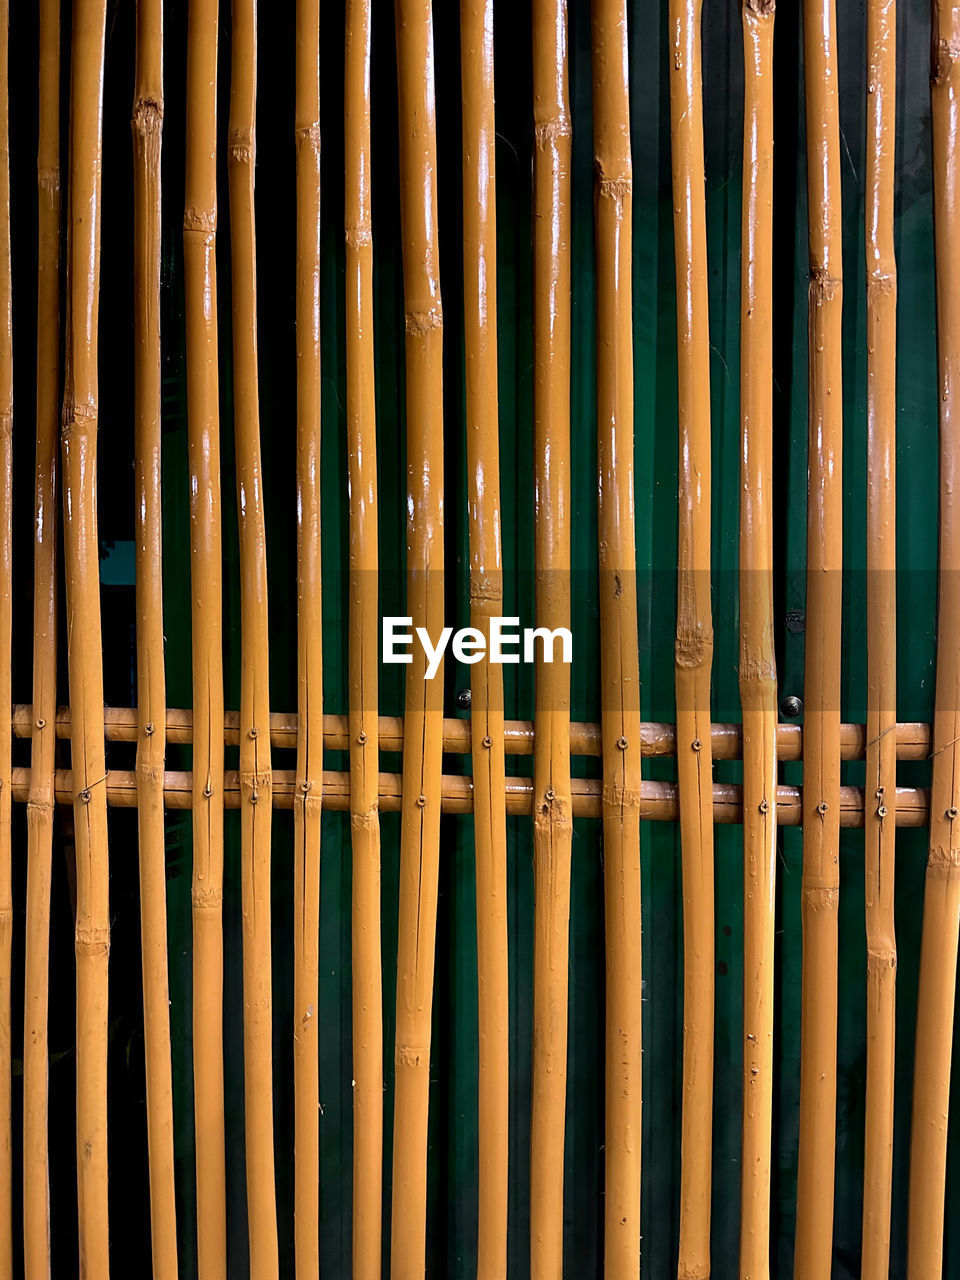 full frame, wood, backgrounds, pattern, no people, bamboo, line, close-up, metal, interior design, security, window covering, day, protection, repetition, architecture, outdoors, yellow, brown, side by side, textured, in a row, fence